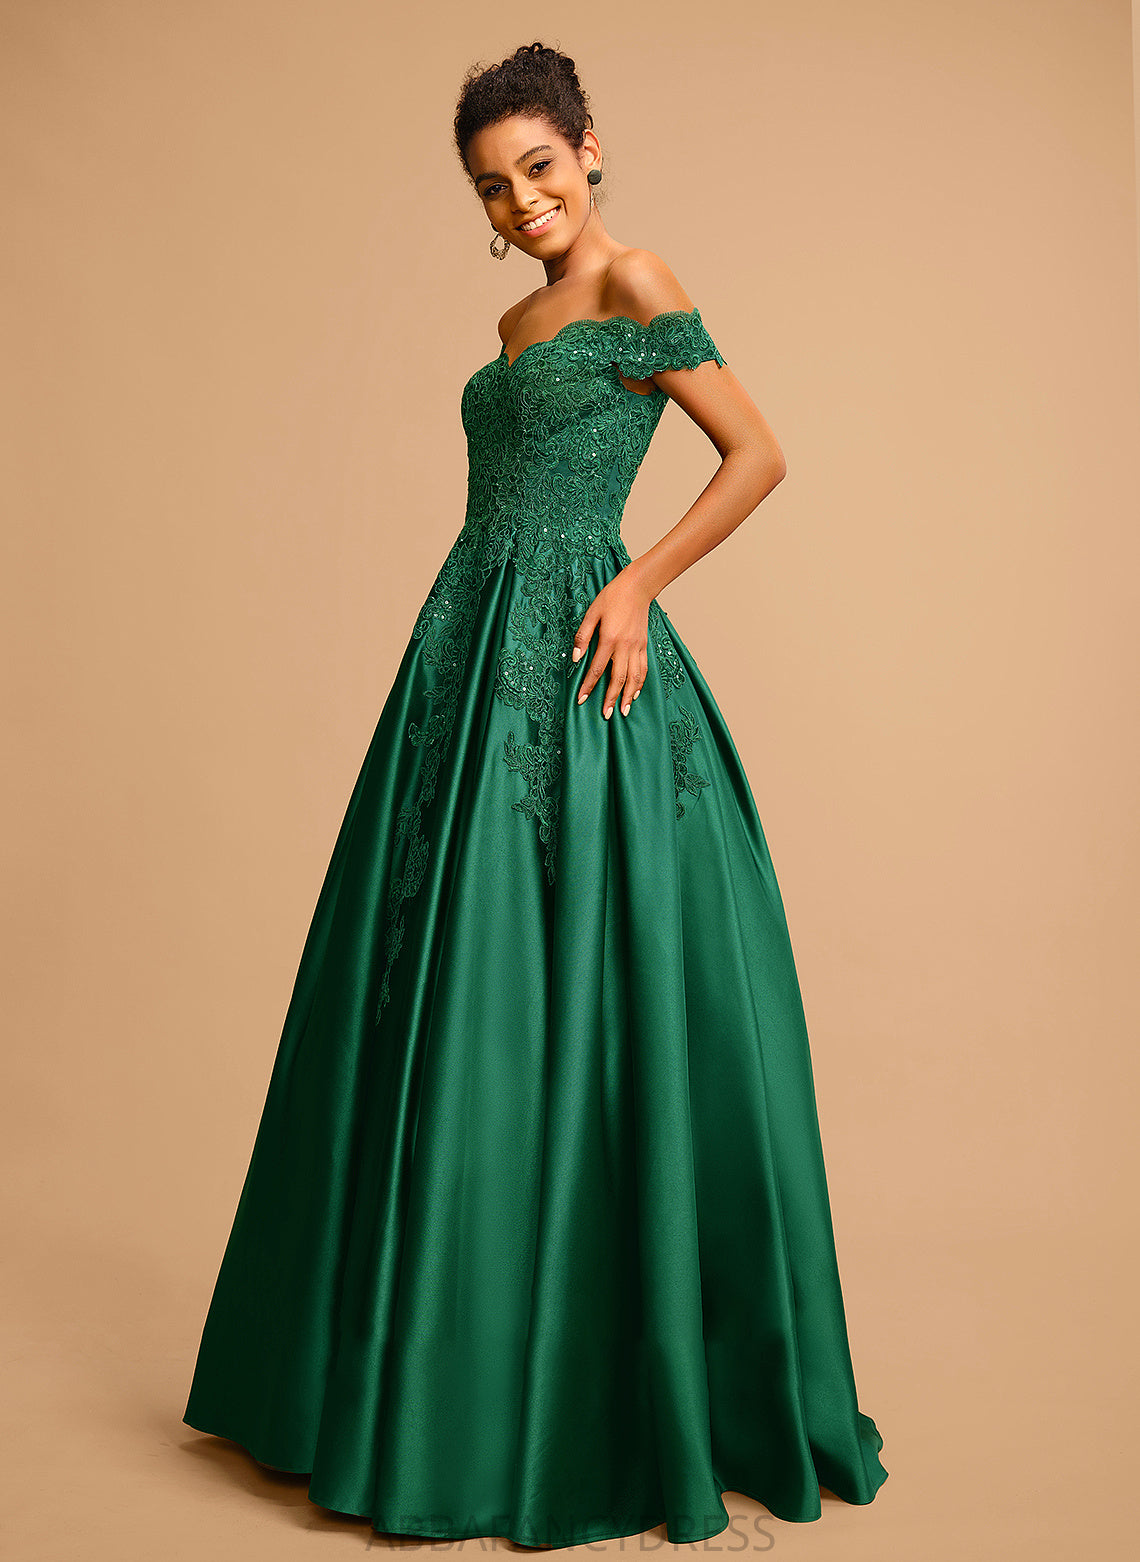 Prom Dresses Floor-Length Satin Off-the-Shoulder Ball-Gown/Princess With Kamryn Sequins